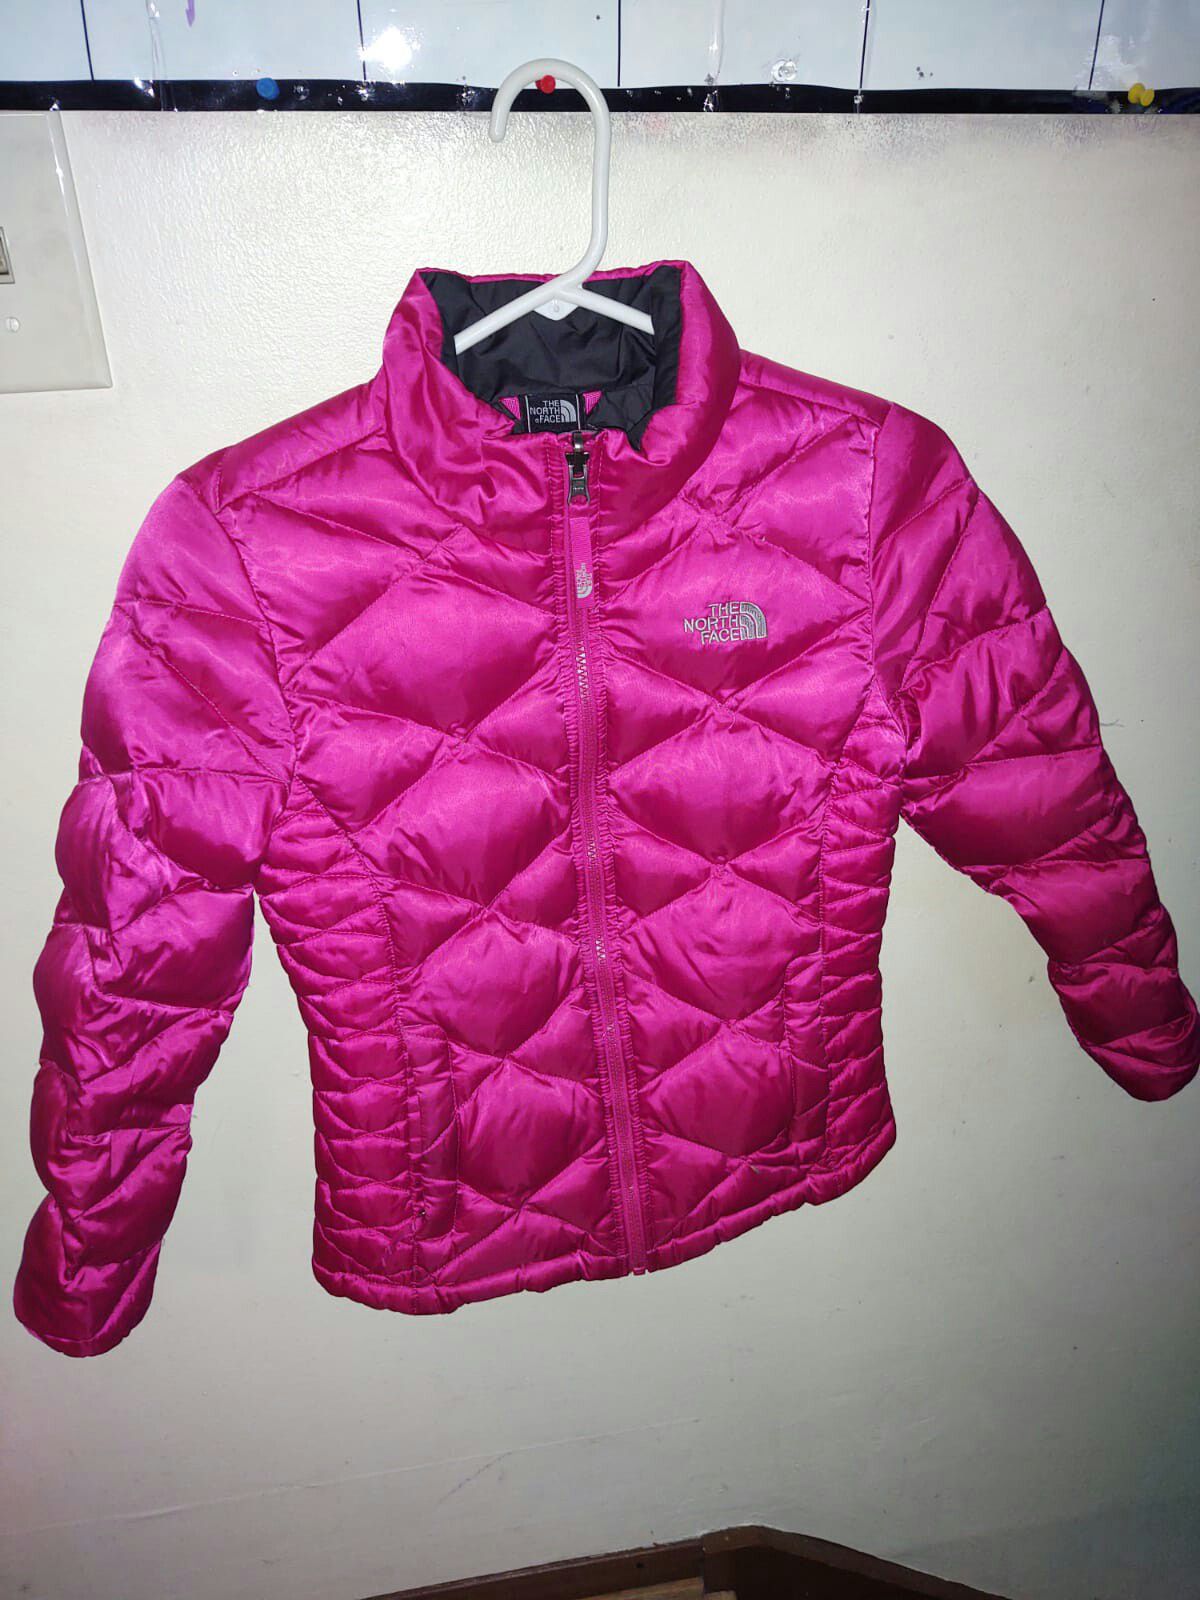 The North Face, Winter Jacket. Size 10-12